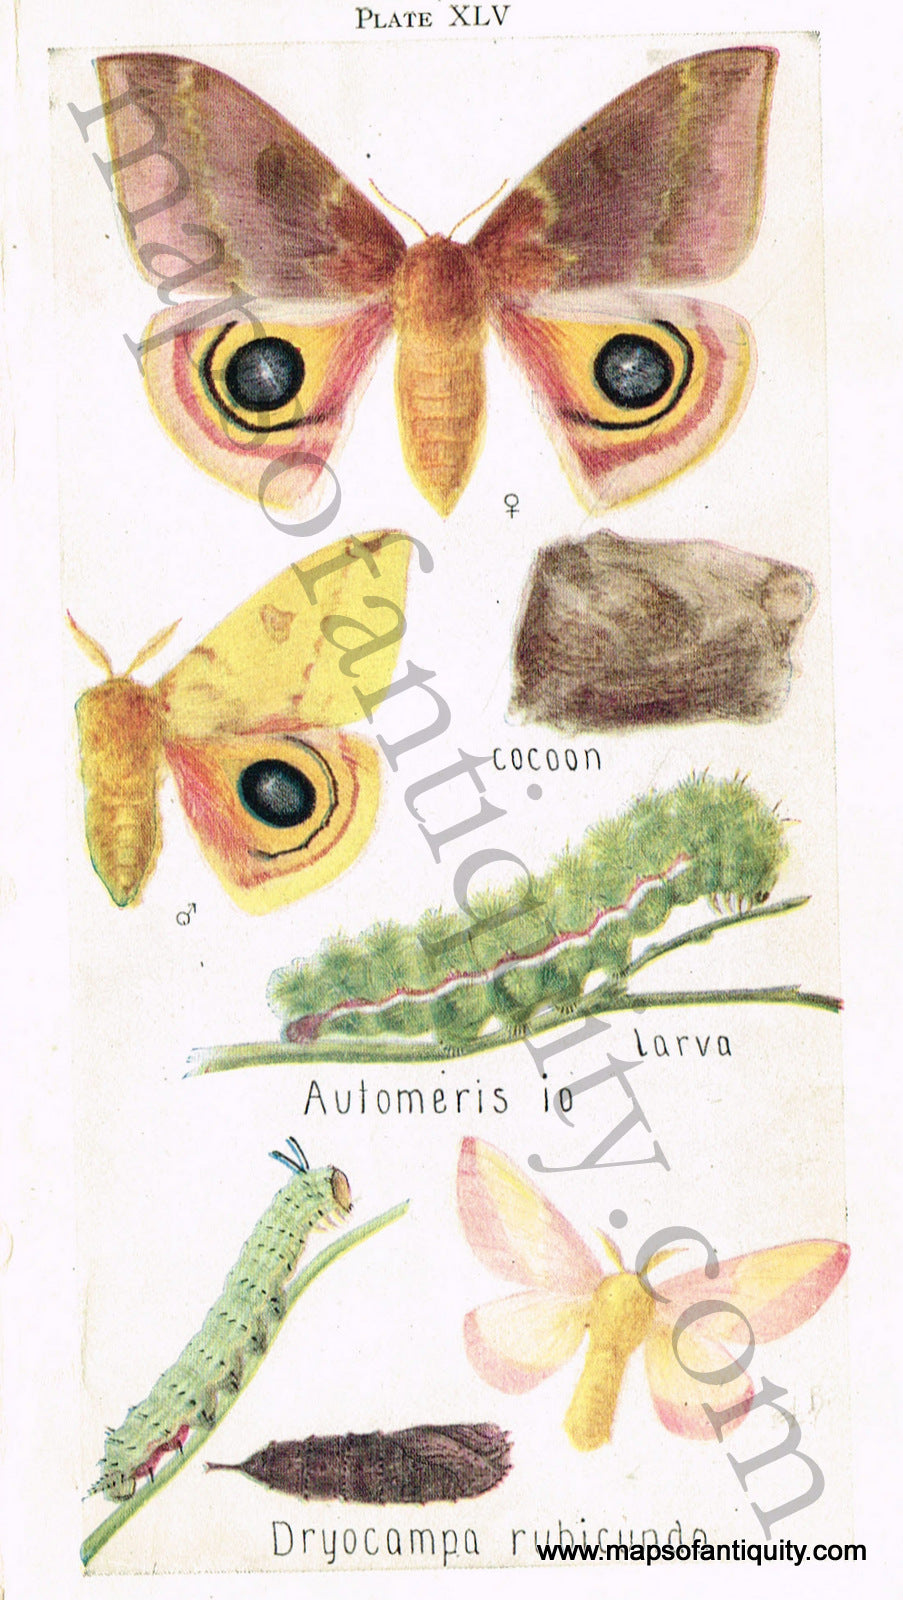 Antique-Chromolithograph-Print-Automeris-io-&-Dryocampa-rubicunda-Antique-Prints-Natural-History-Insects-c.-1880--Maps-Of-Antiquity